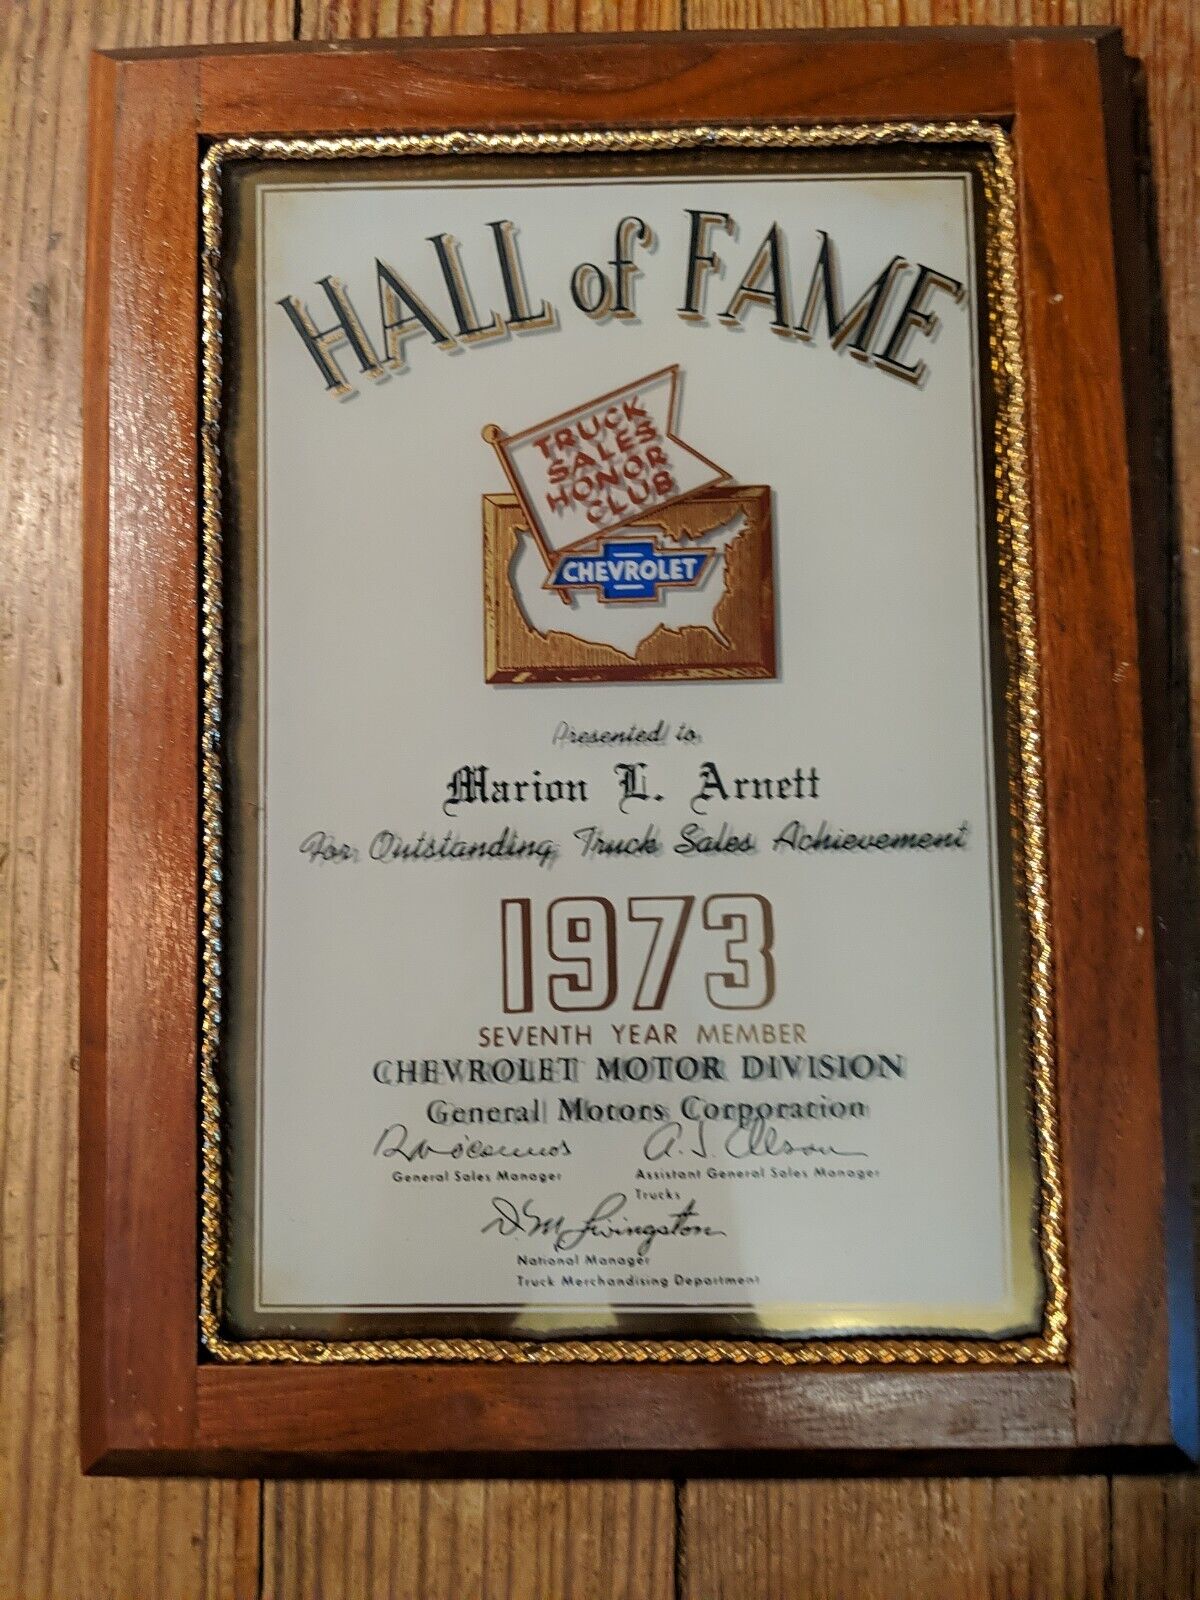 1973 HALL OF FAME CHEVY DEALER TRUCK SALES HONOR CLUB PLAQUE SIGN MARRION ARNETT